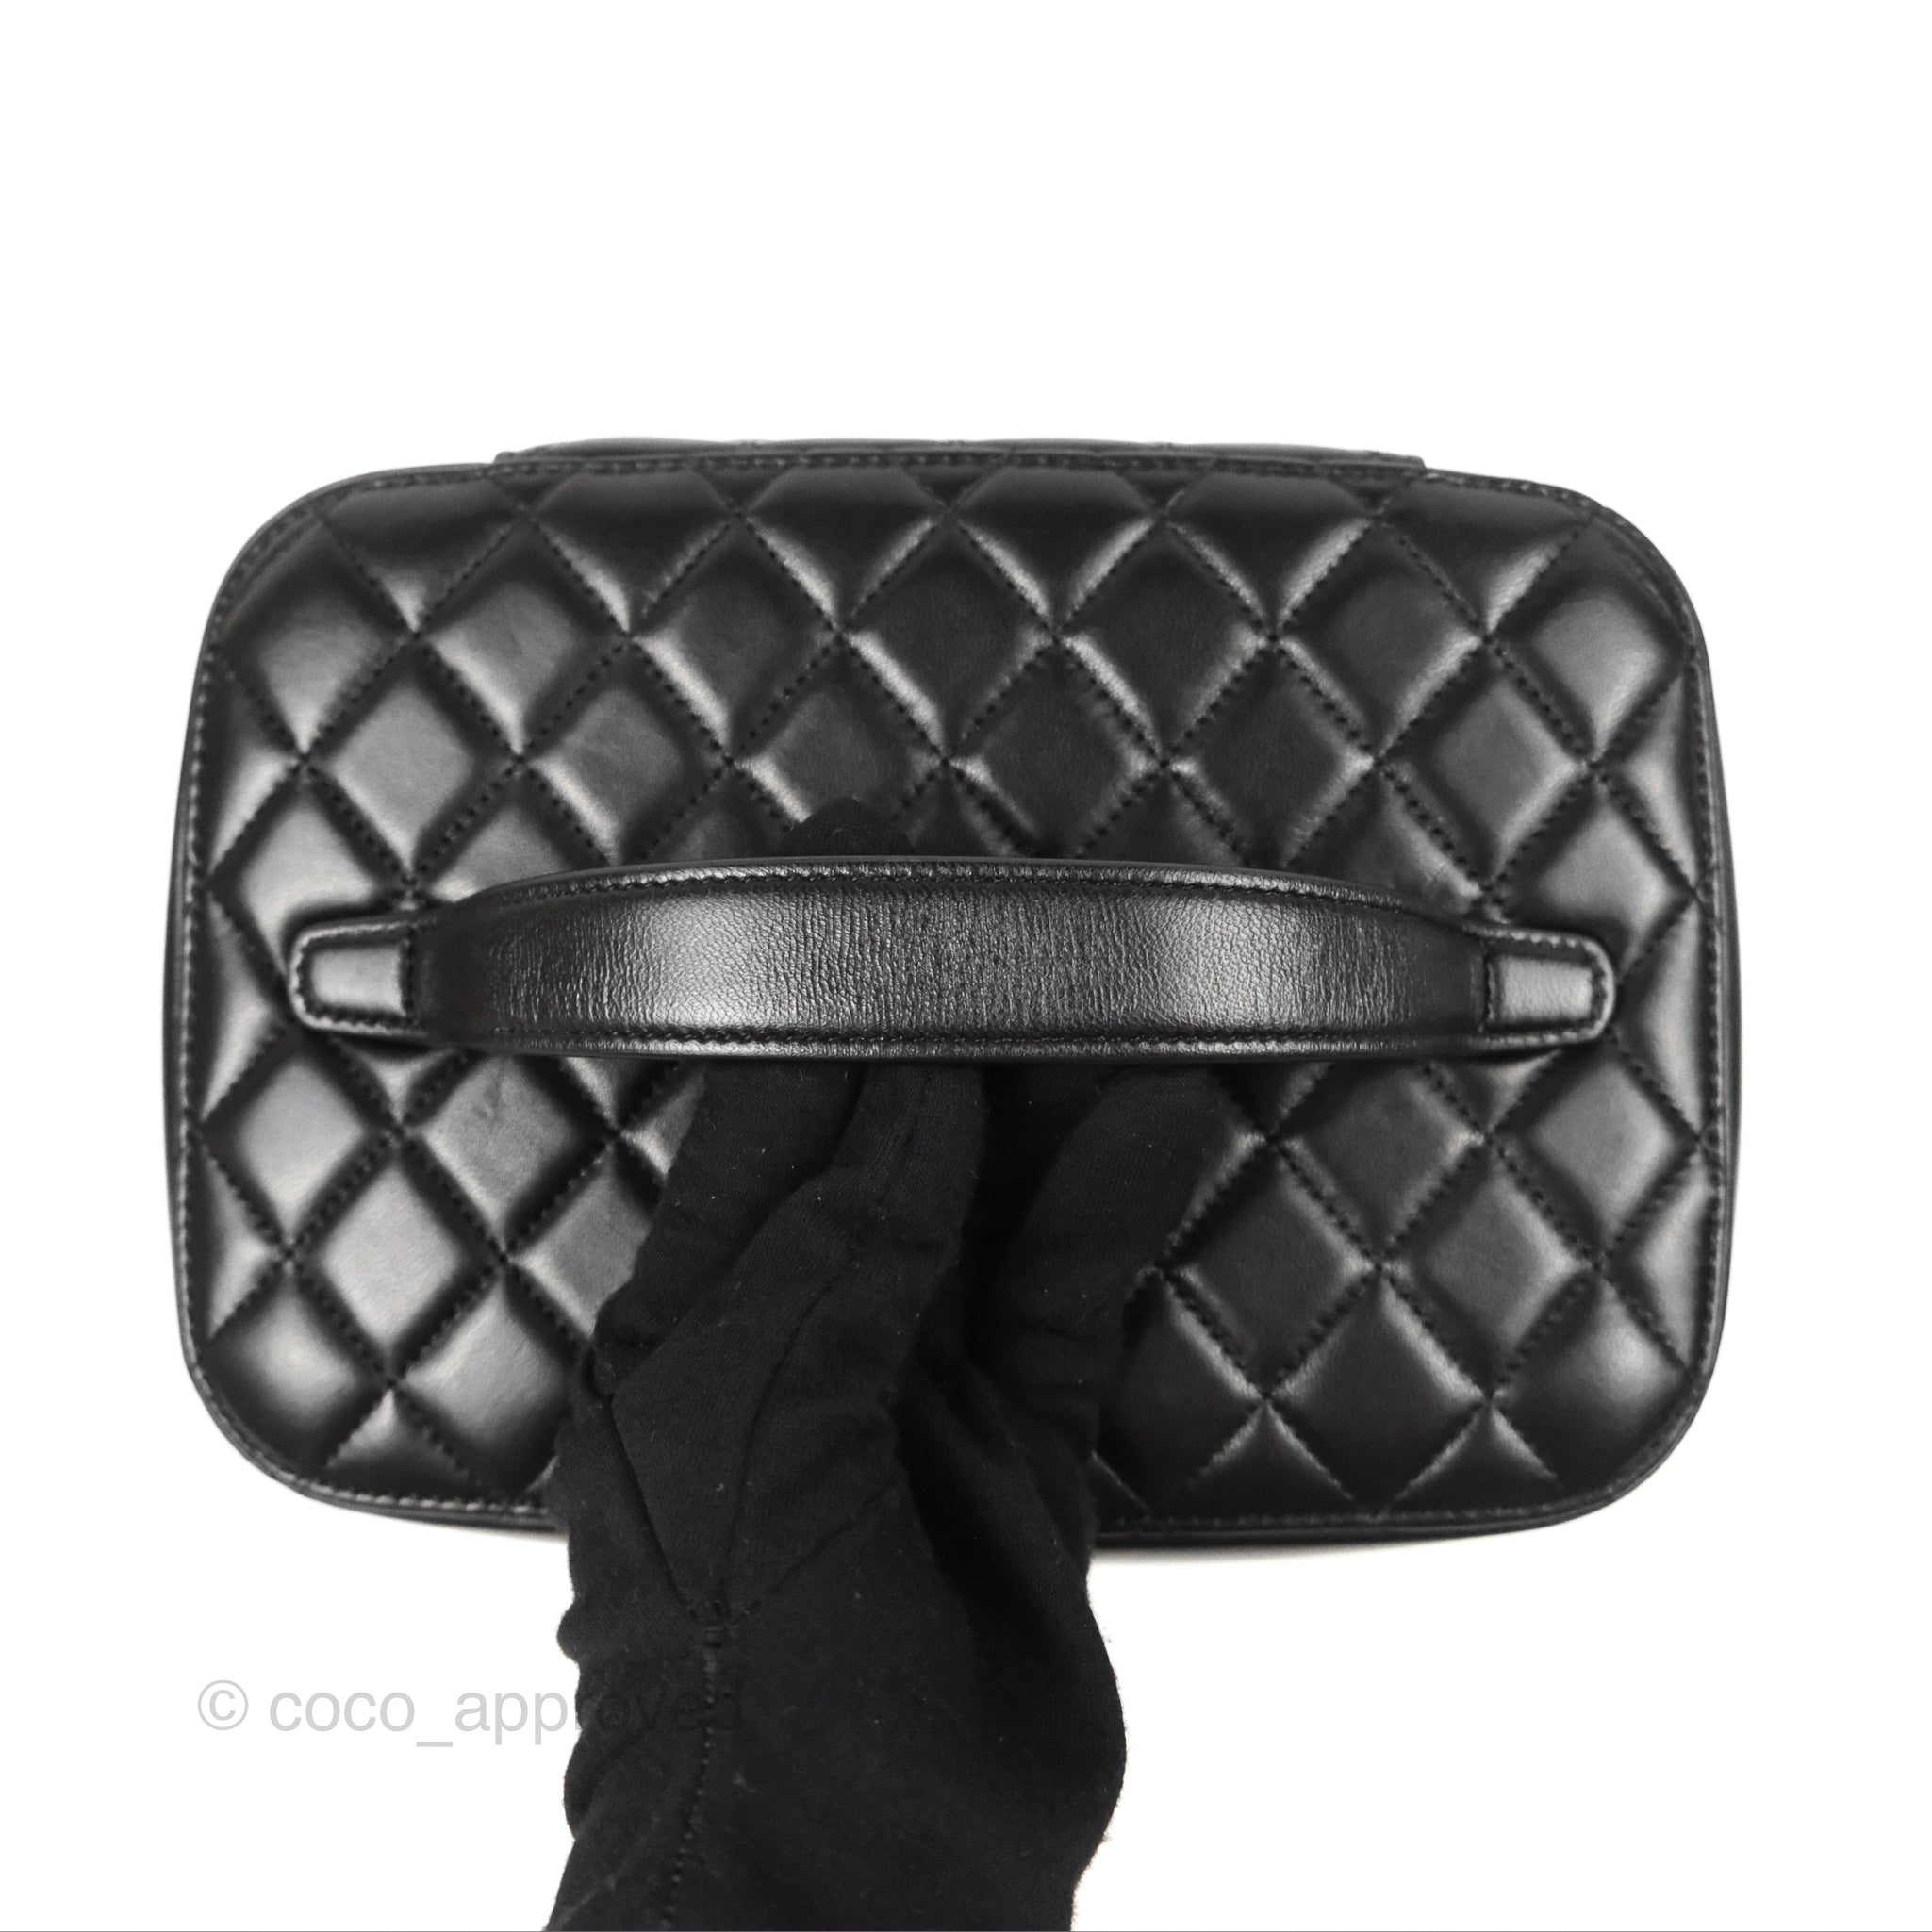 Sold at Auction: Chanel Silver Leather Toiletry Bag